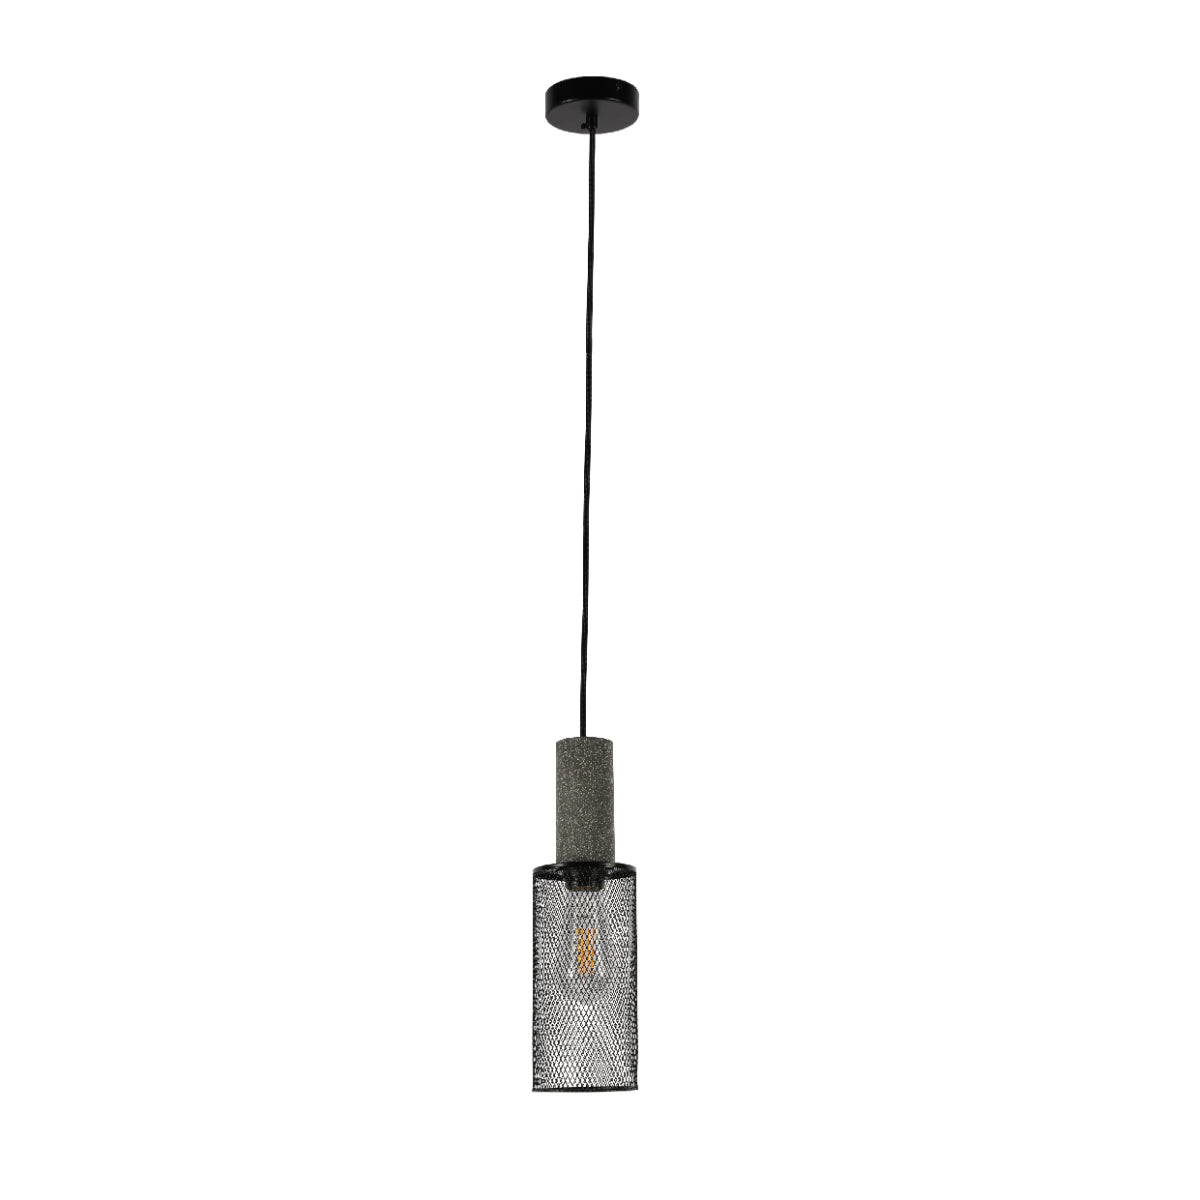 Main image of Quartet of Textured Concrete Pendant Lights with Metal Shades - TEKLED 150-19050